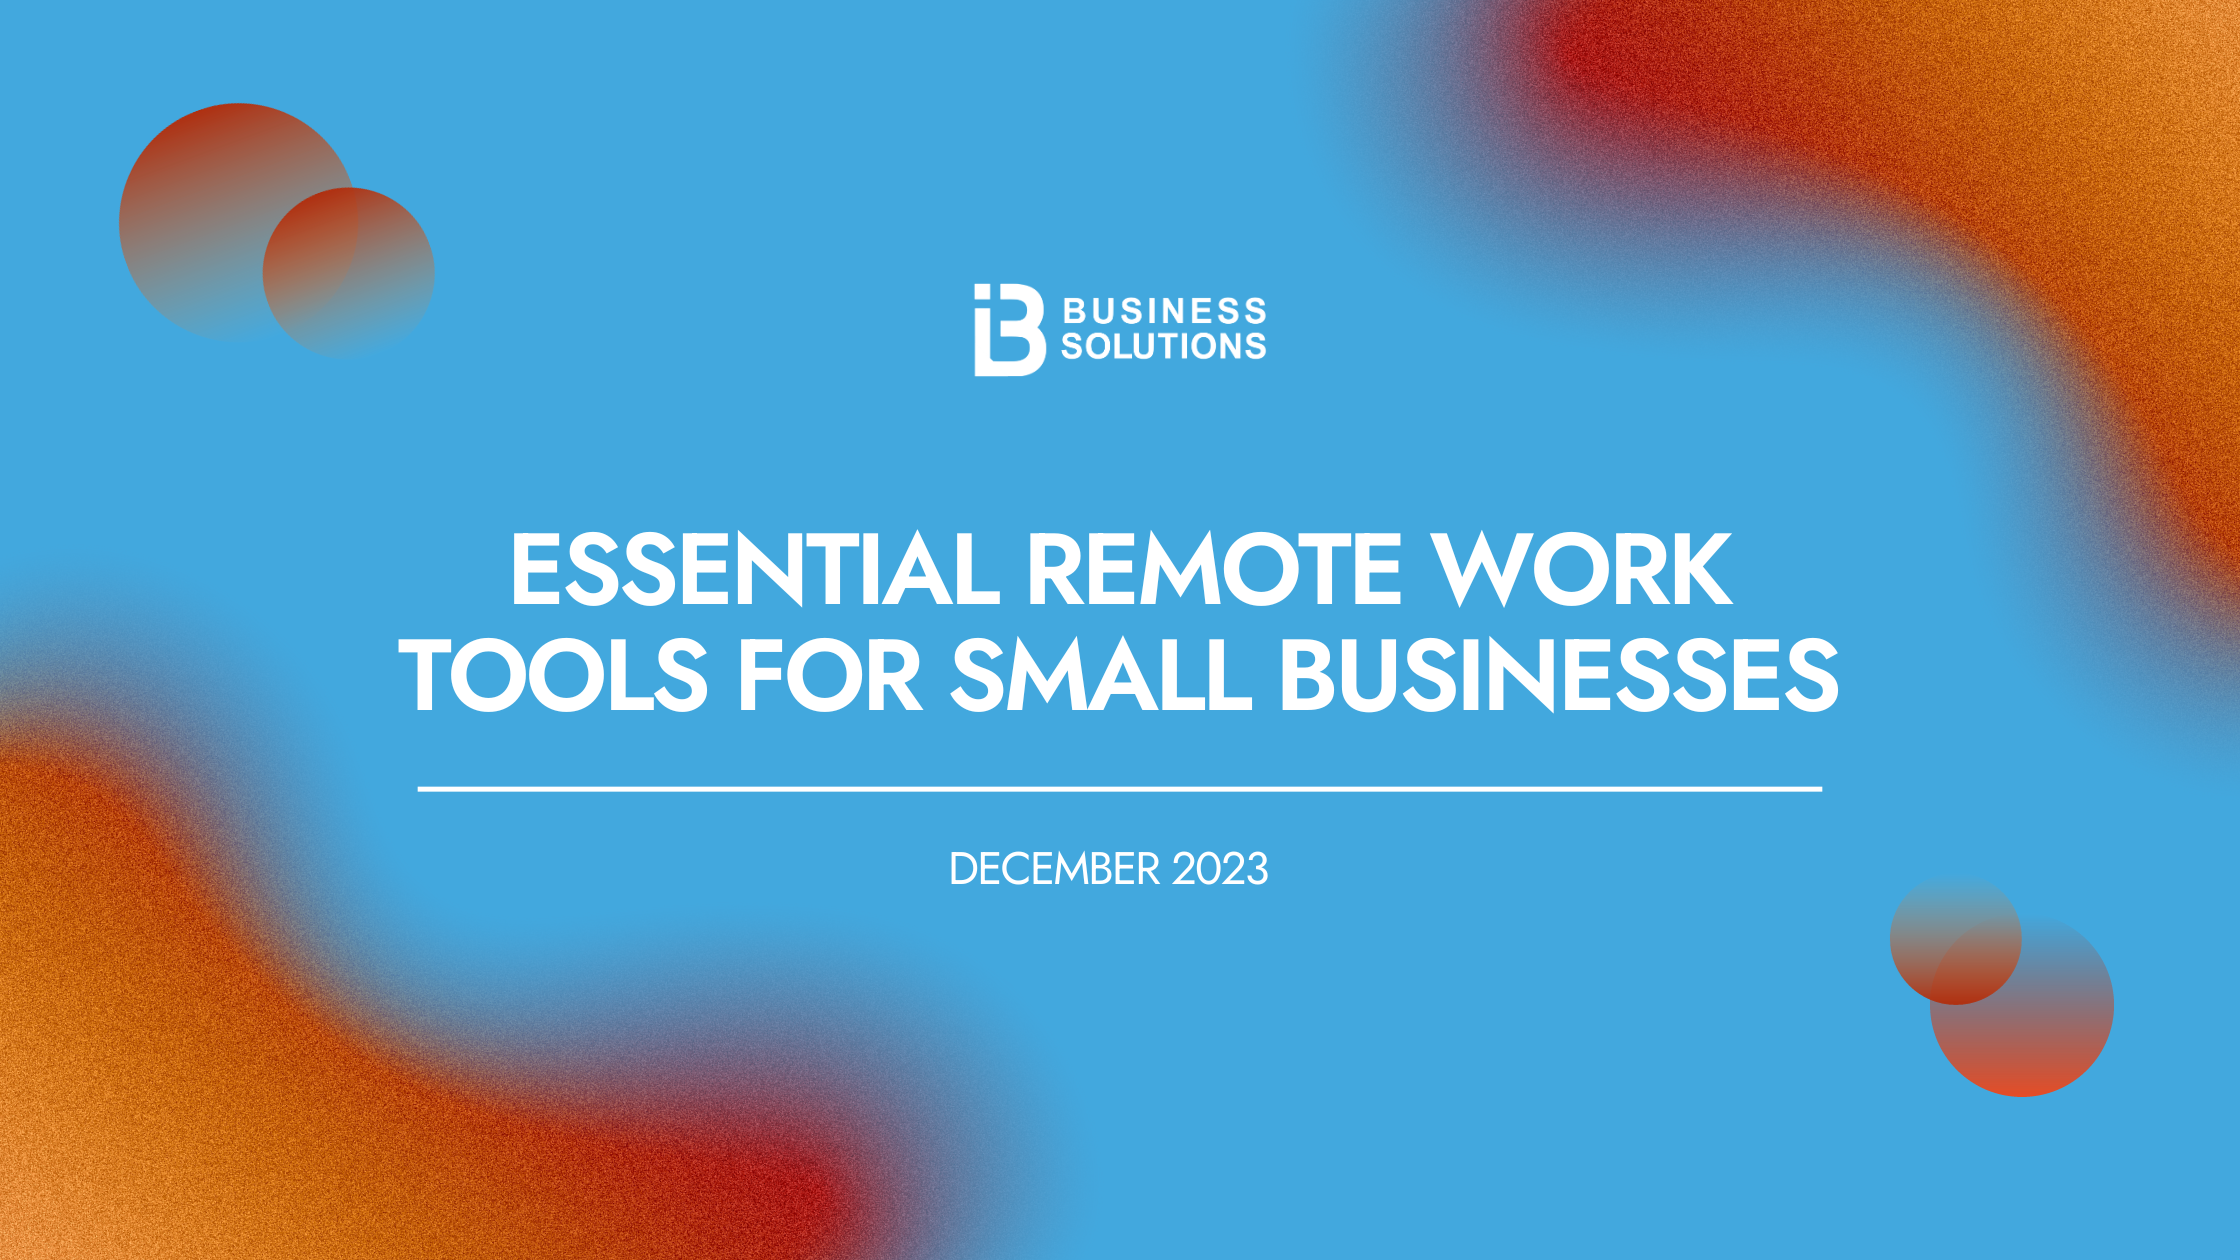 Essential Remote Work Tools for Small Businesses